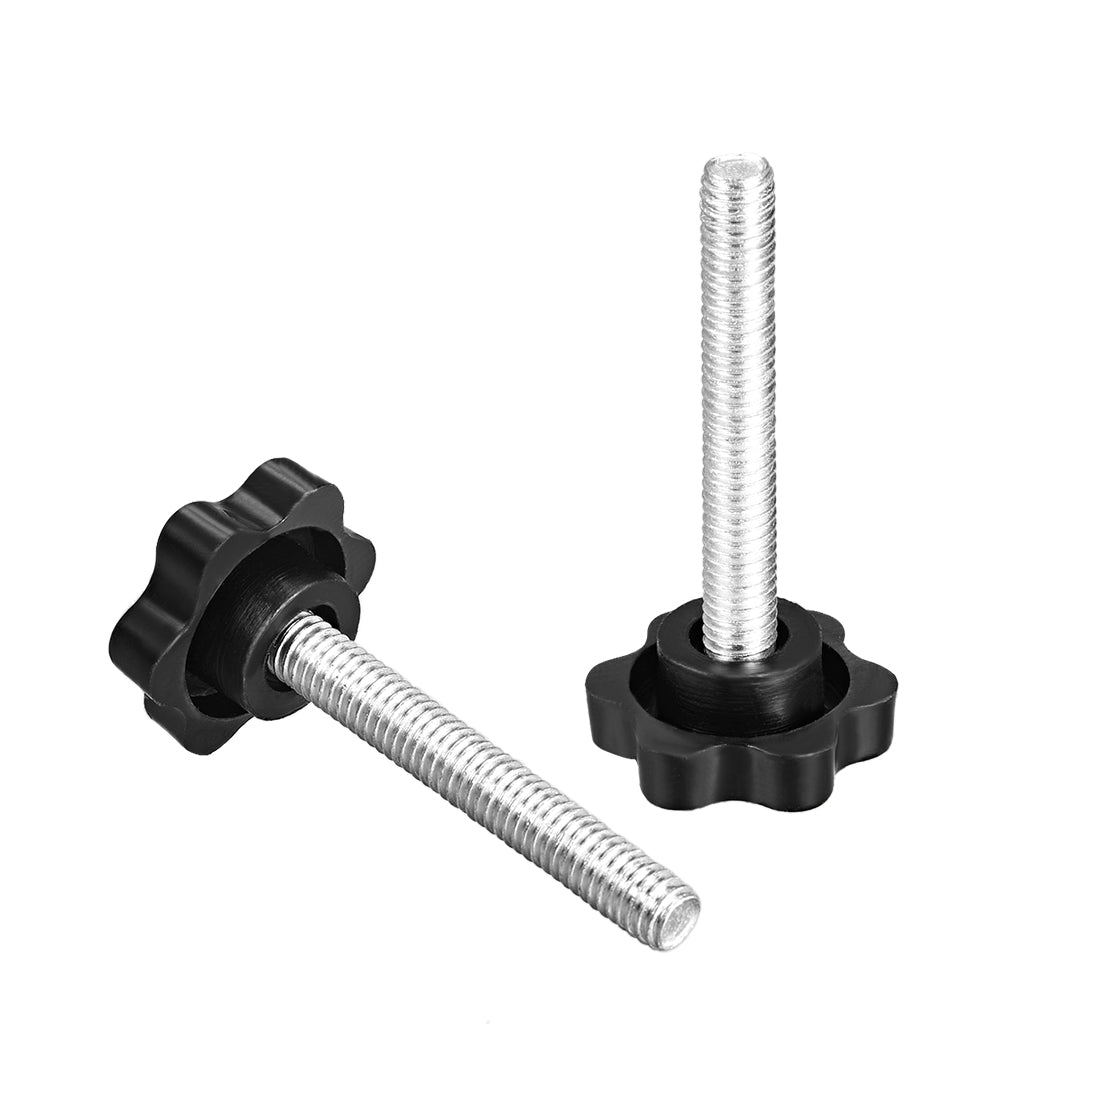 uxcell Uxcell Clamping Handle Gripandles Screw Knobs Handgrips Star Knob  Male Thread pcs